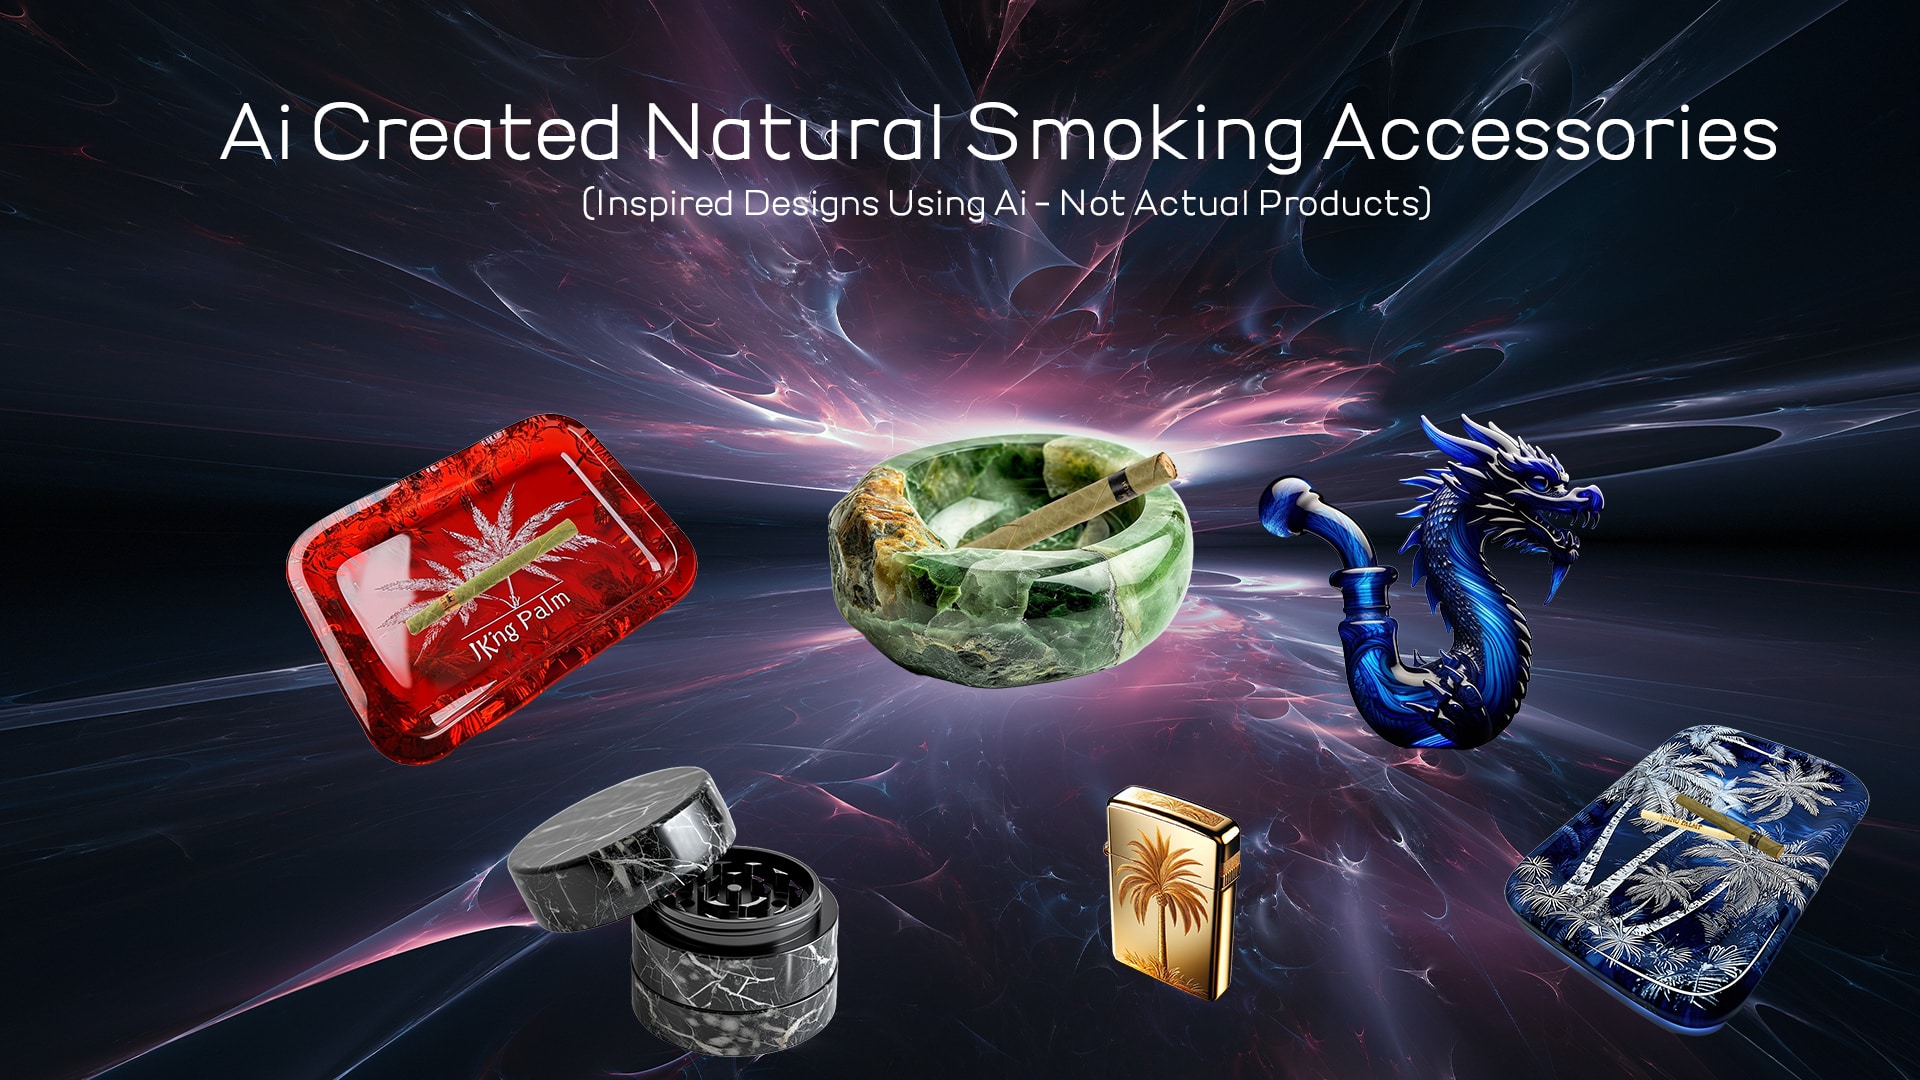 New Natural Smoking Accessories Concepts Inspired by AI